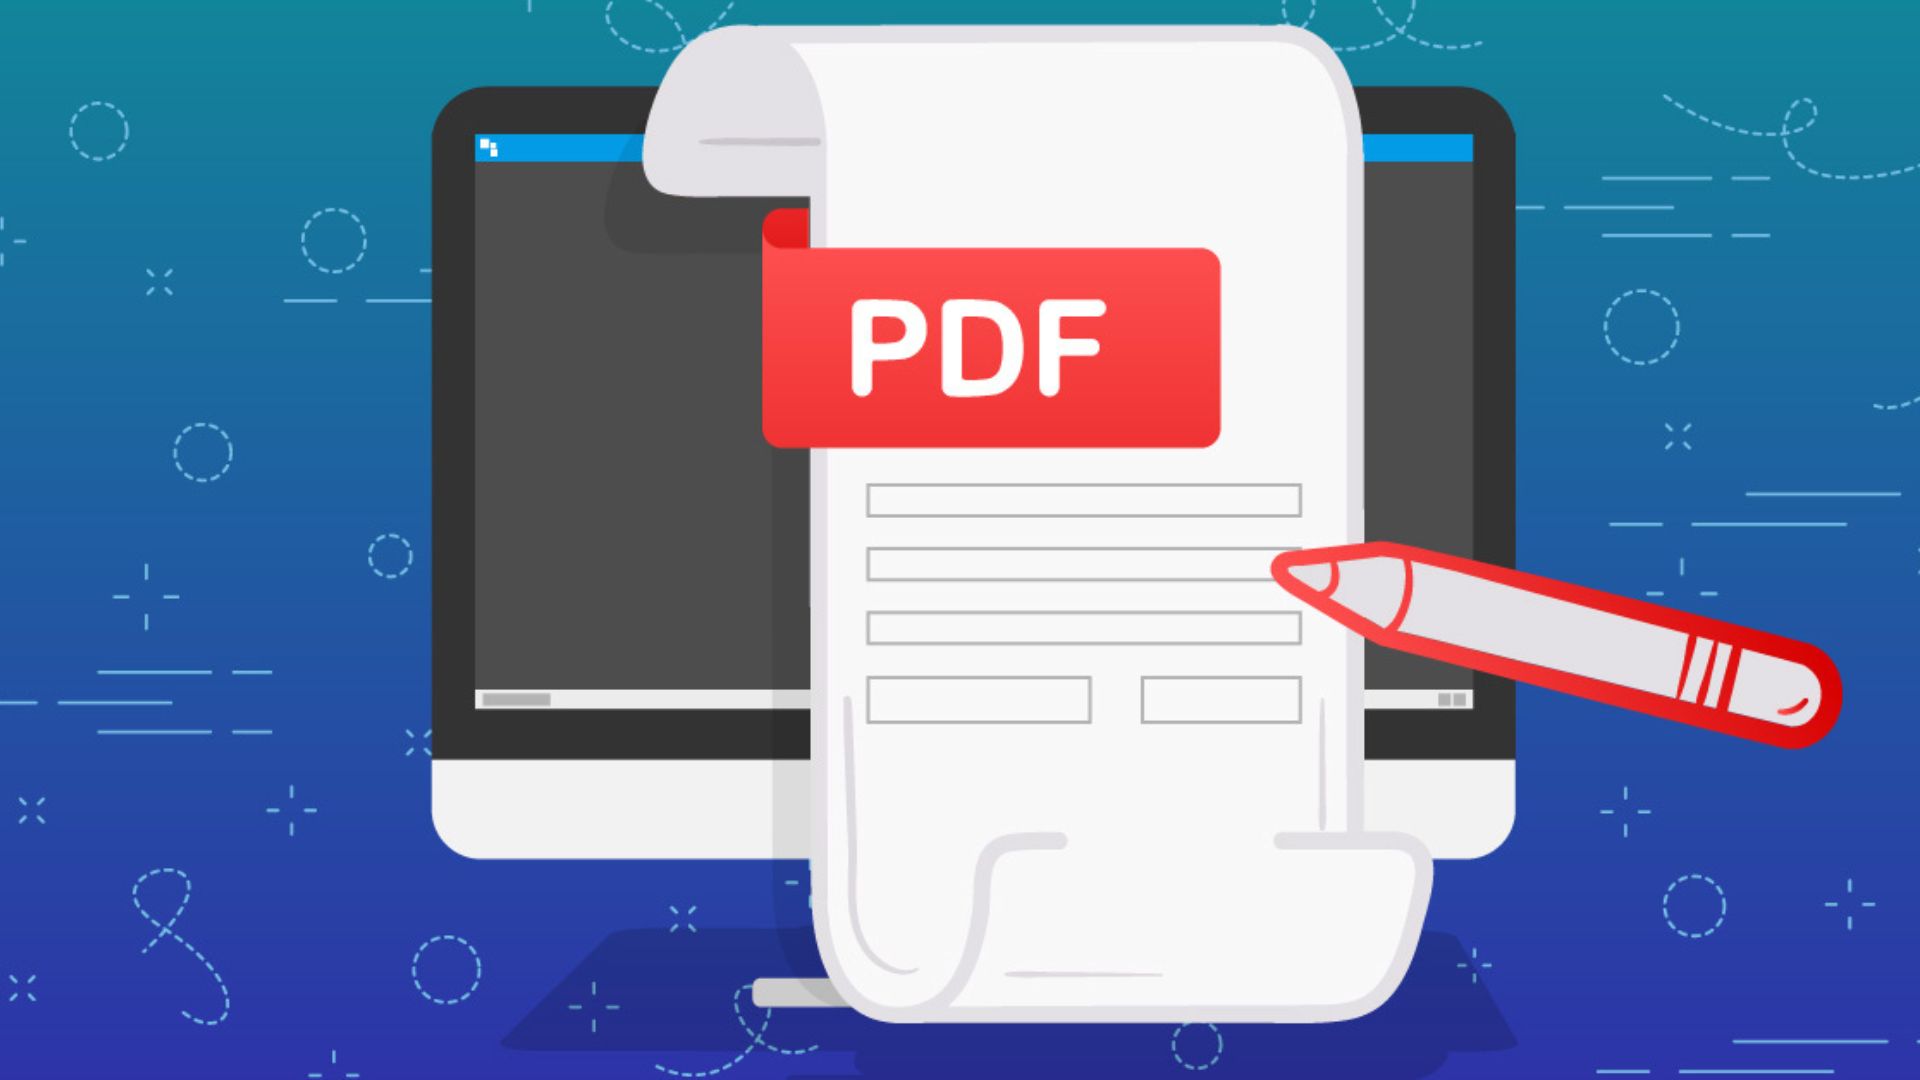 this image shows Interactive PDF forms